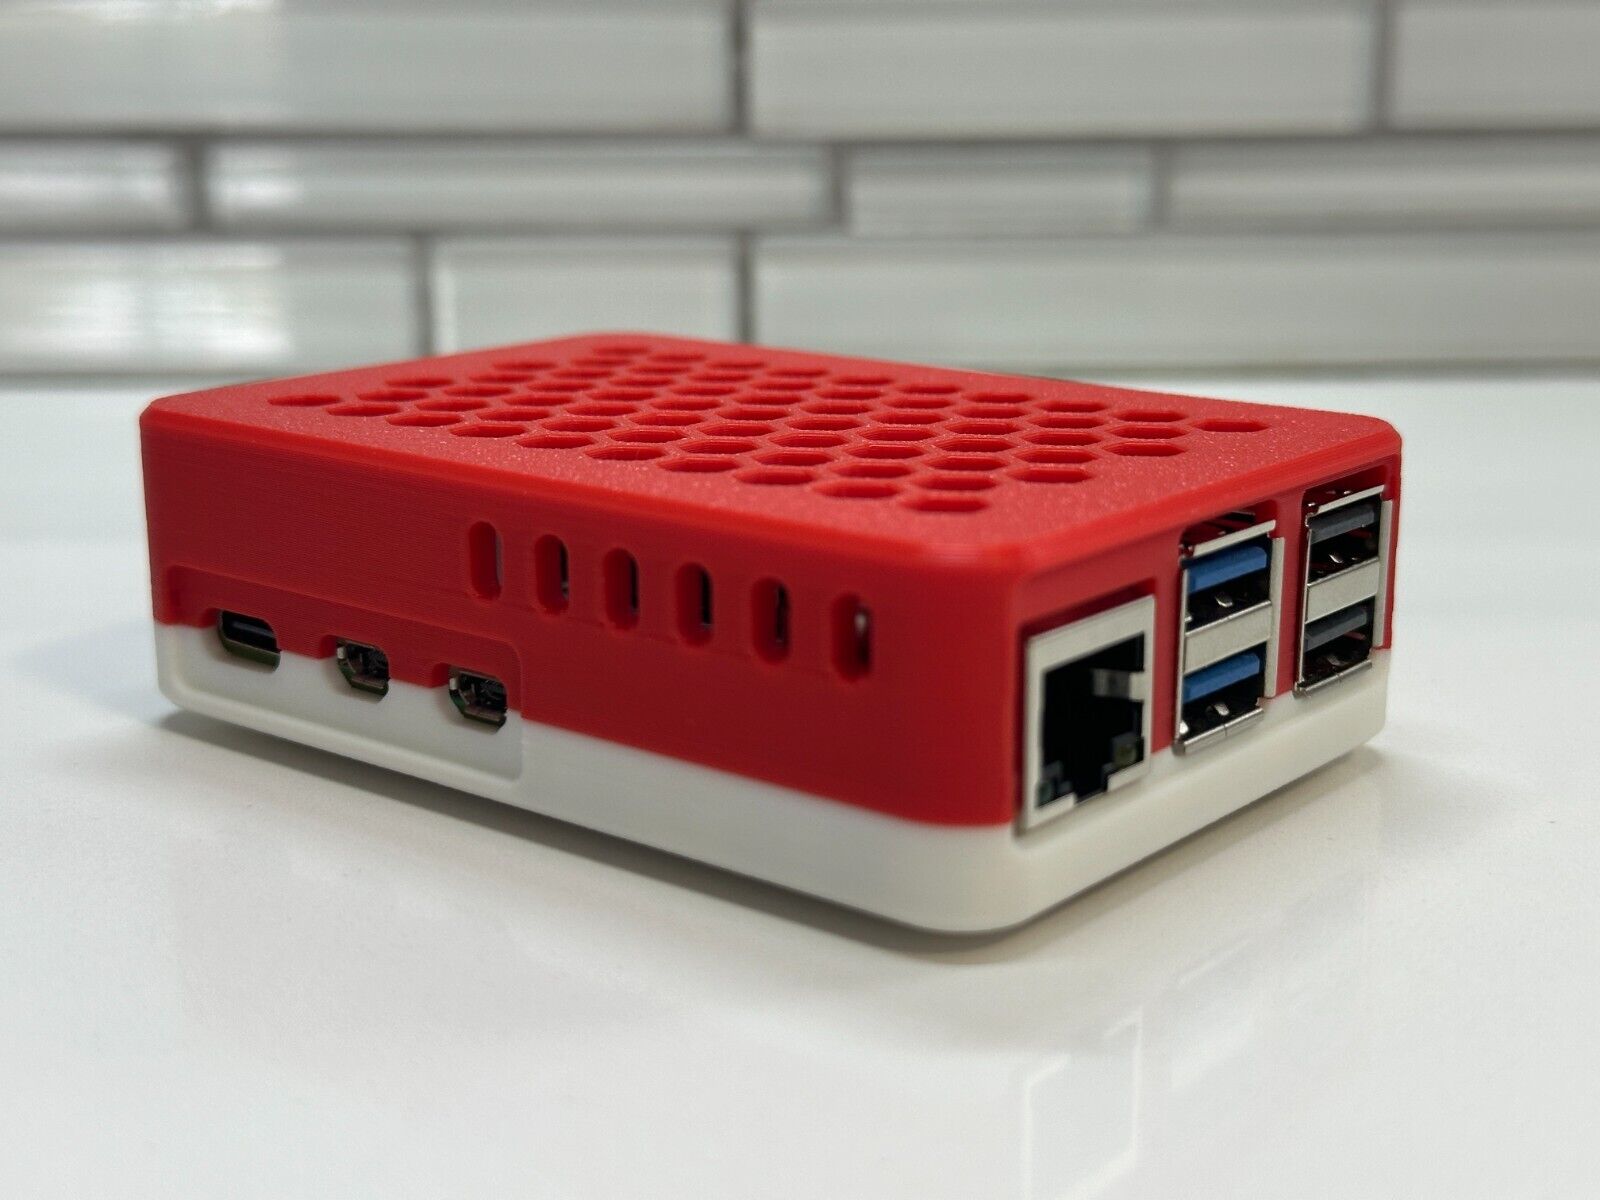 Custom 3D Printed Raspberry Pi 5 Case with Silicone Bumper Pads